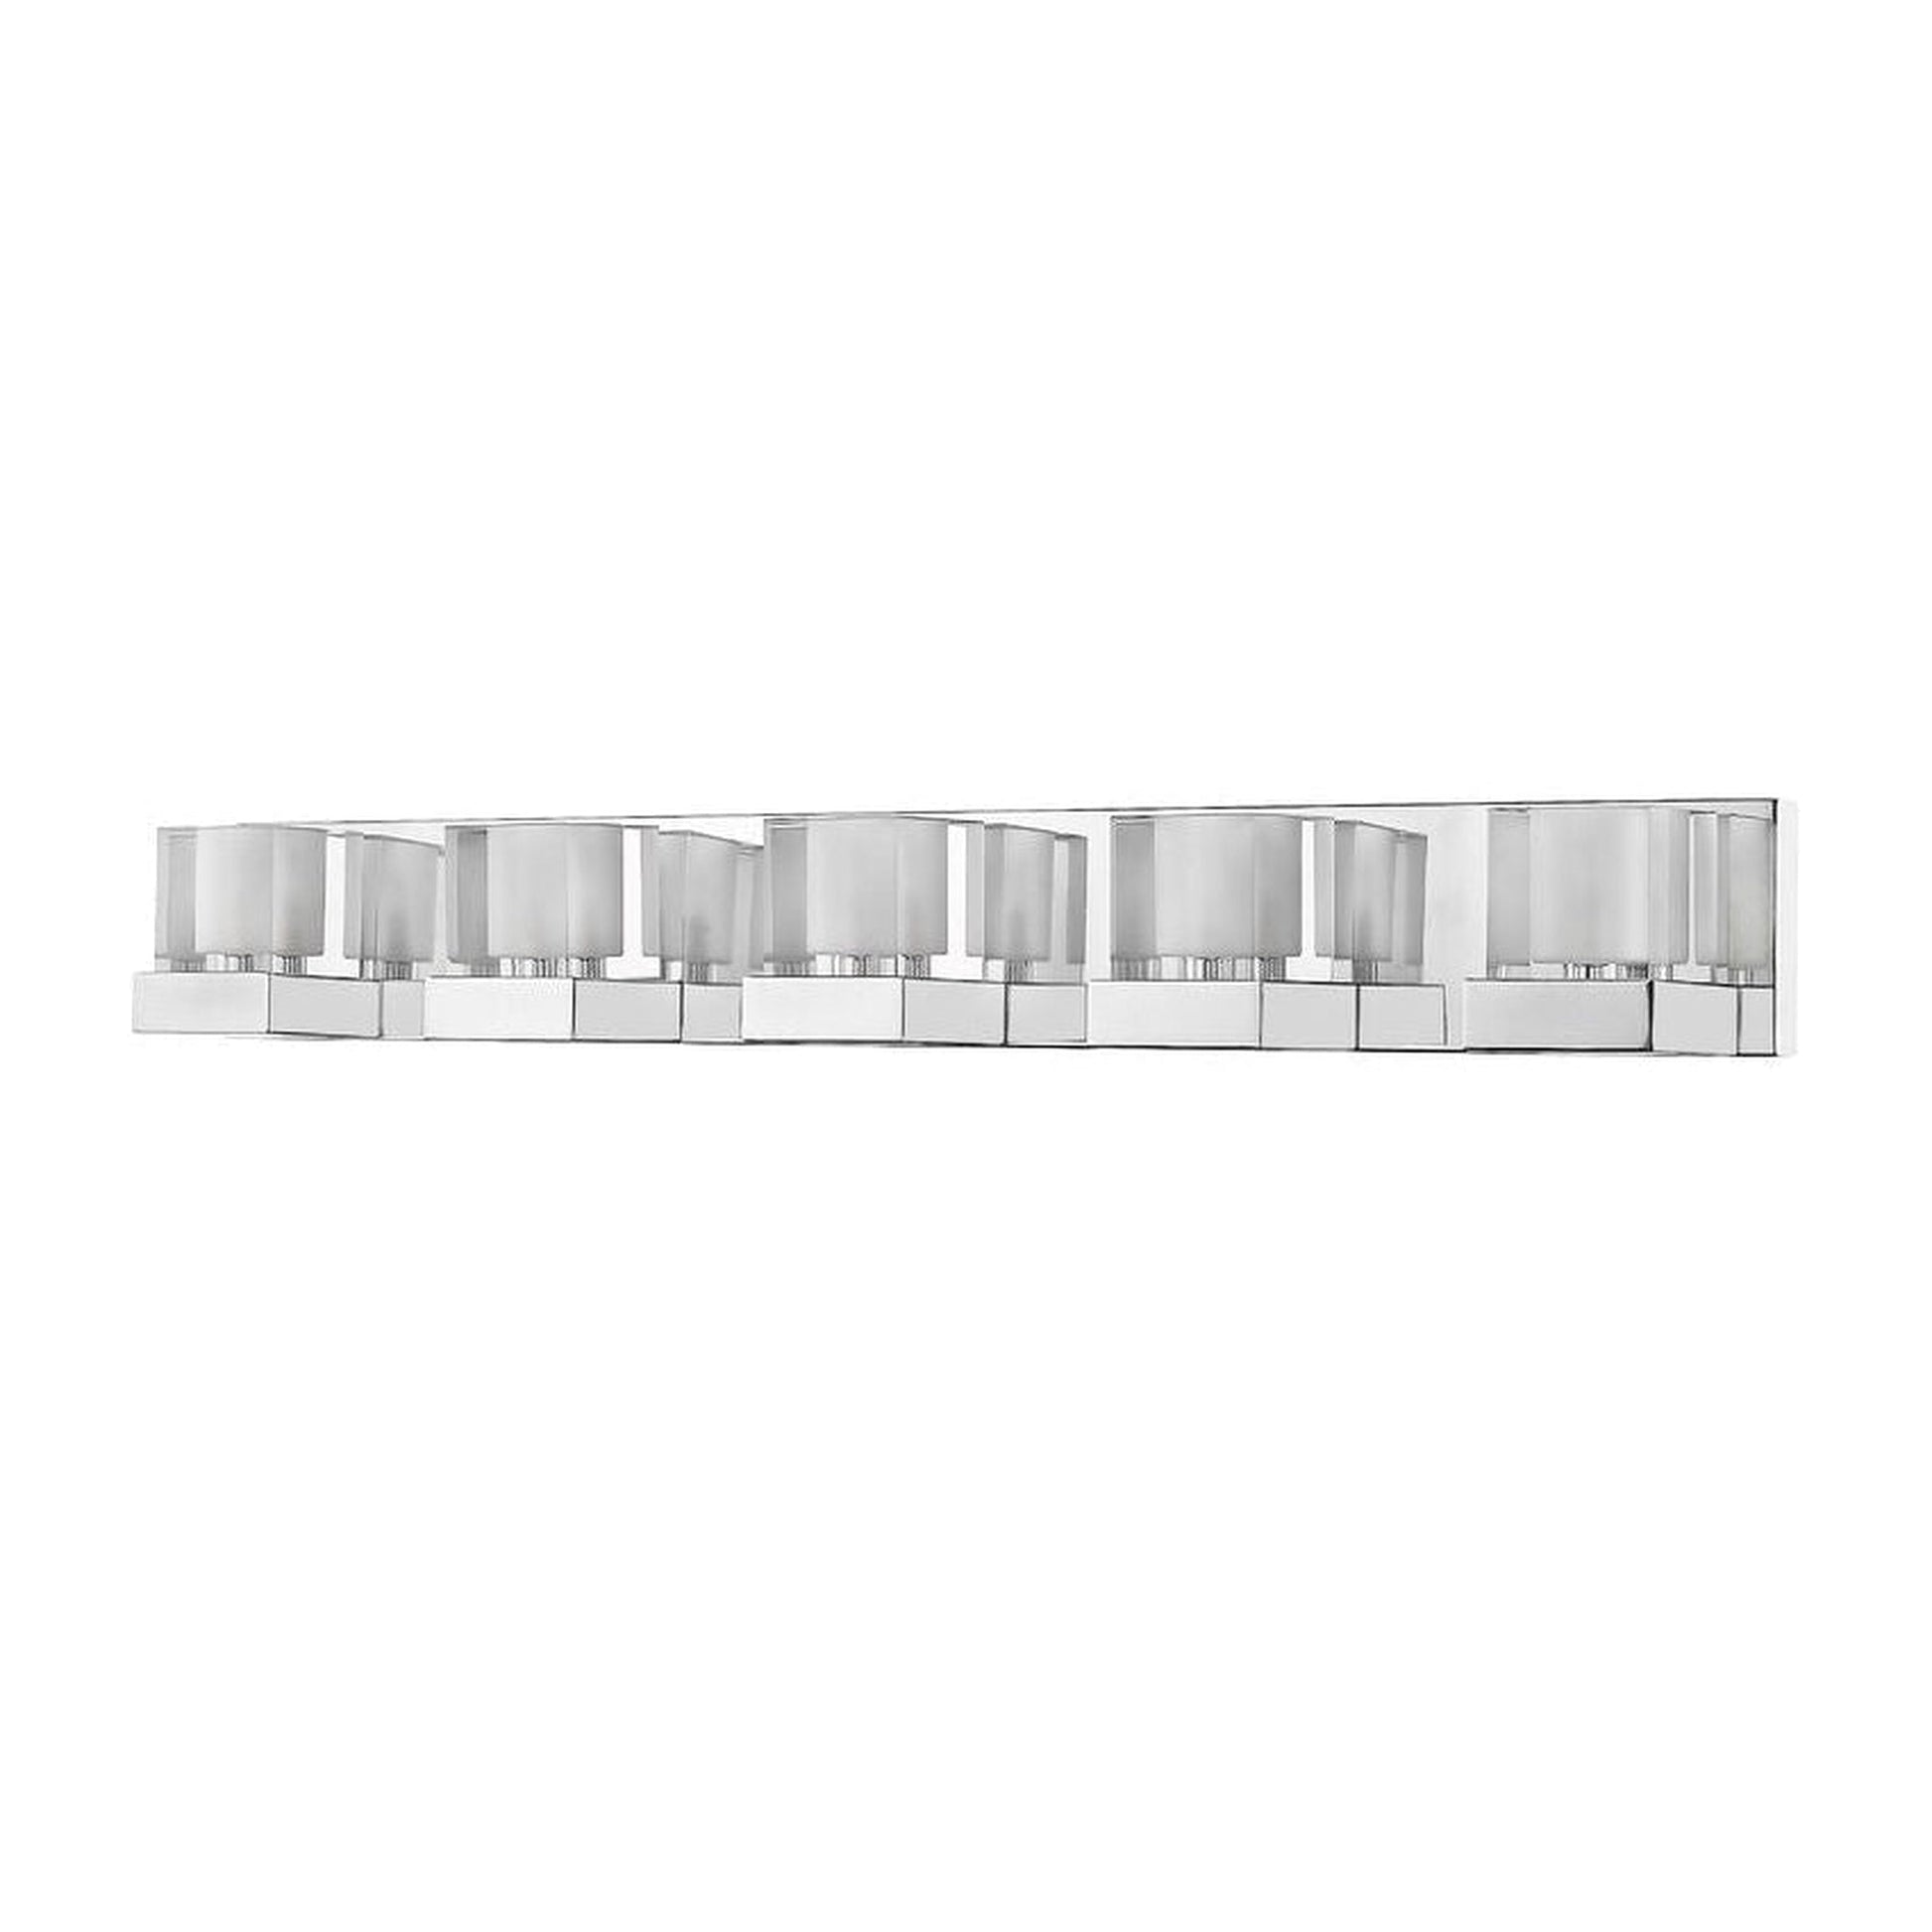 Z-Lite Fallon 34" 5-Light Chrome Vanity Light With Clear and Frosted Crystal Shade